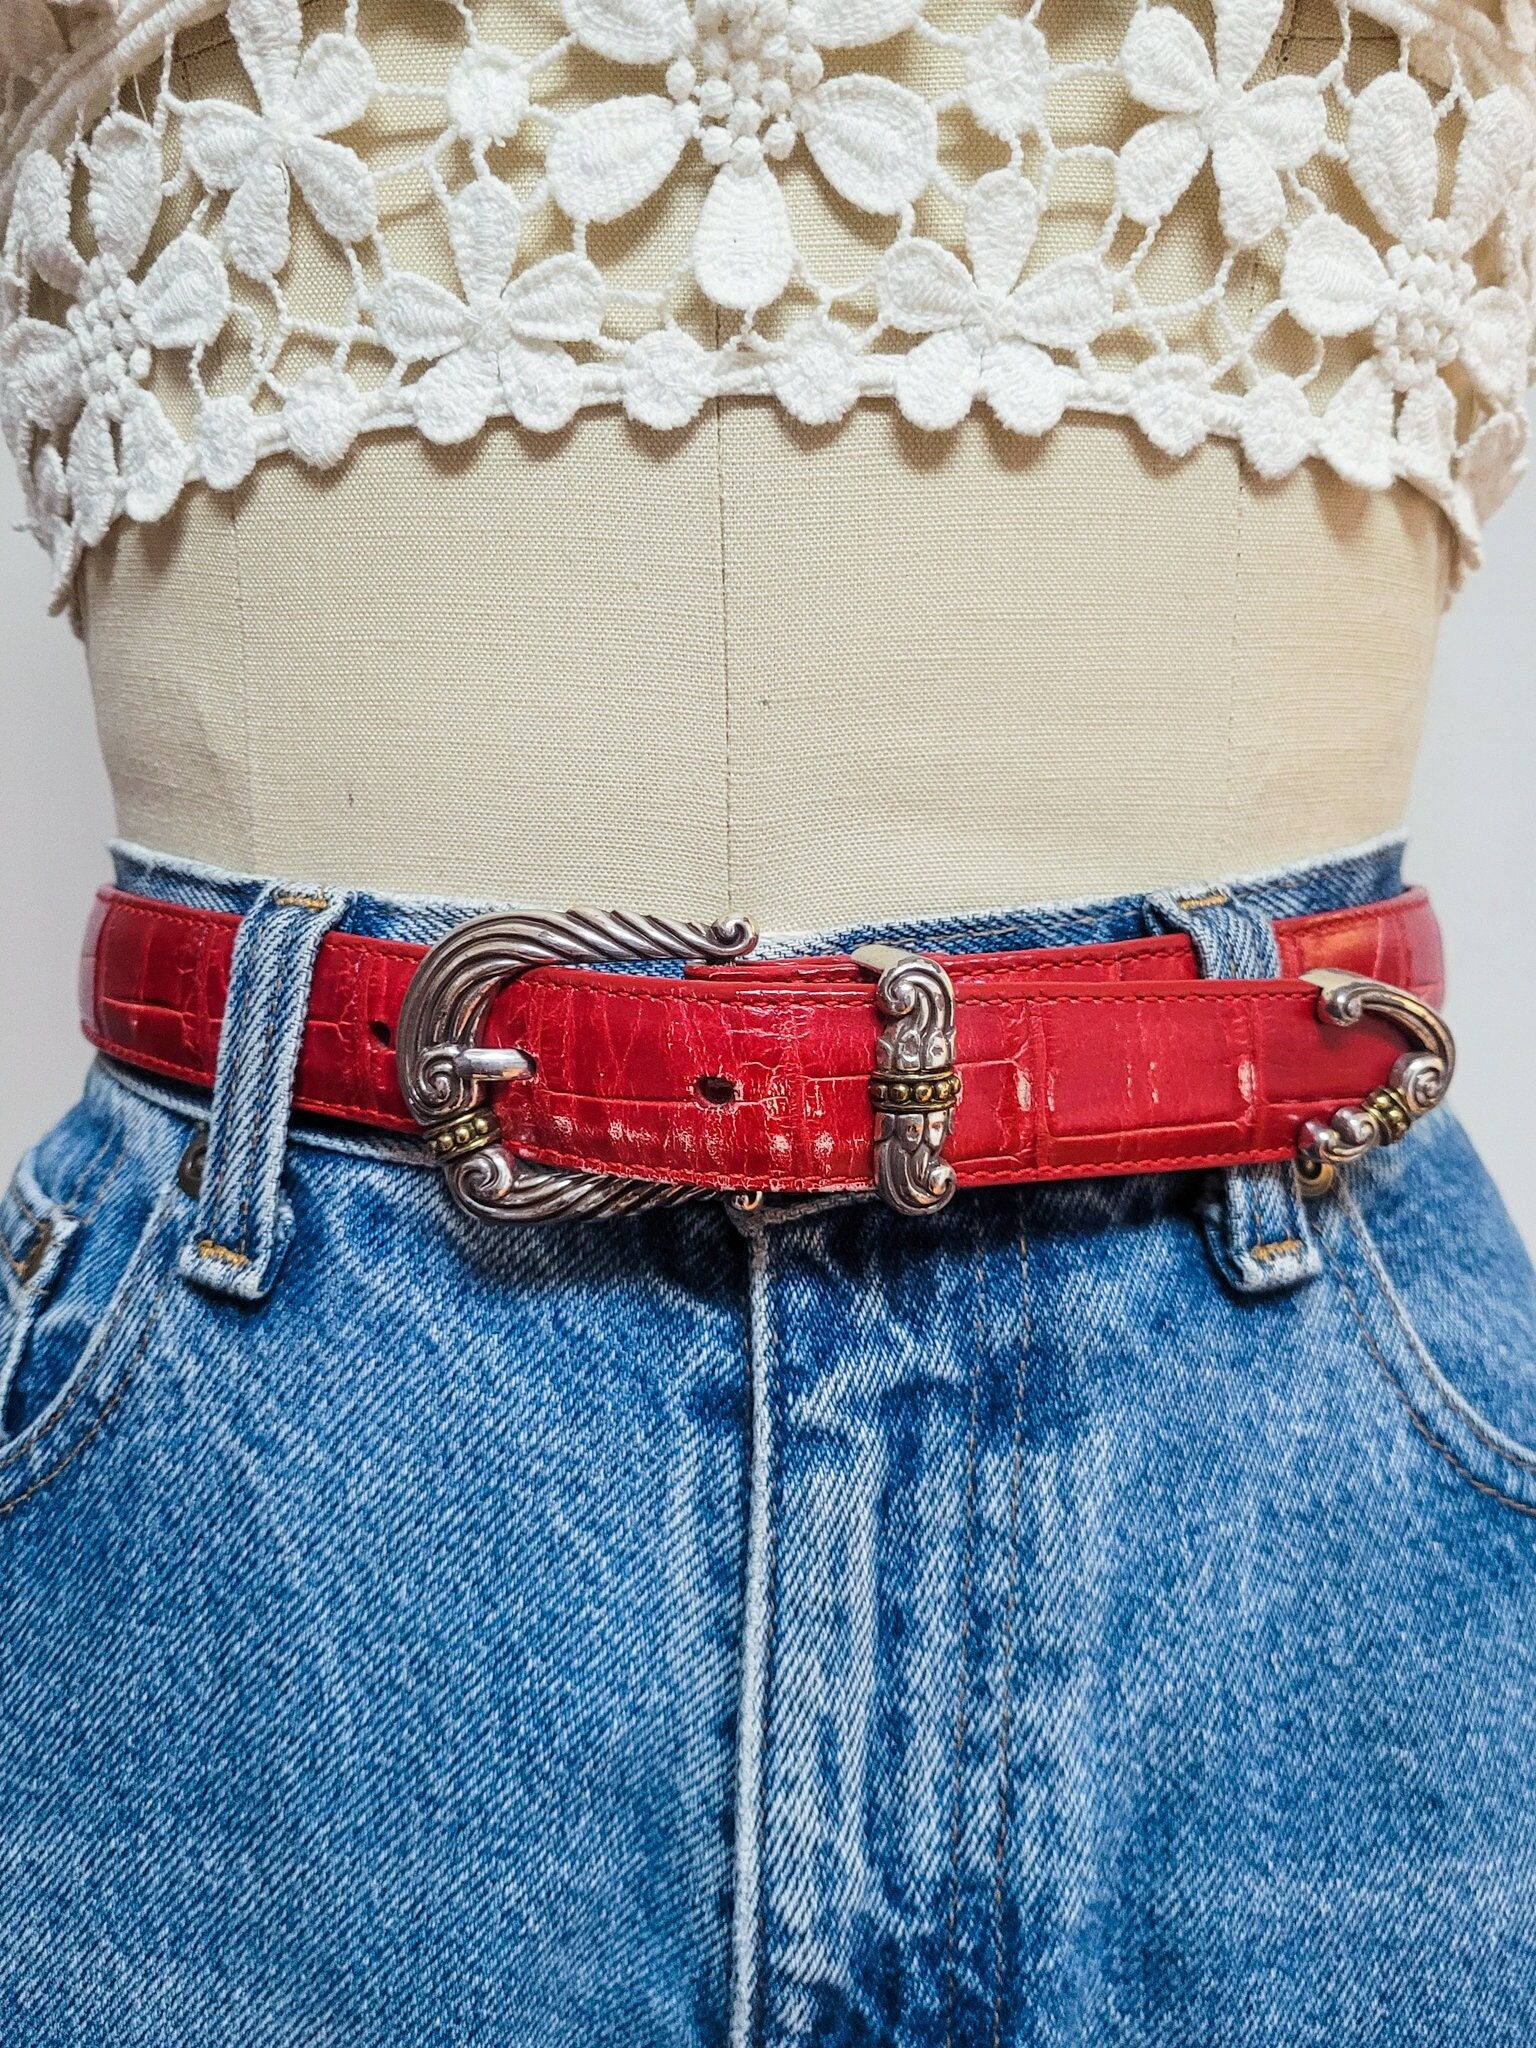 Add a Pop of Color: Red Belts for Stylish Statements